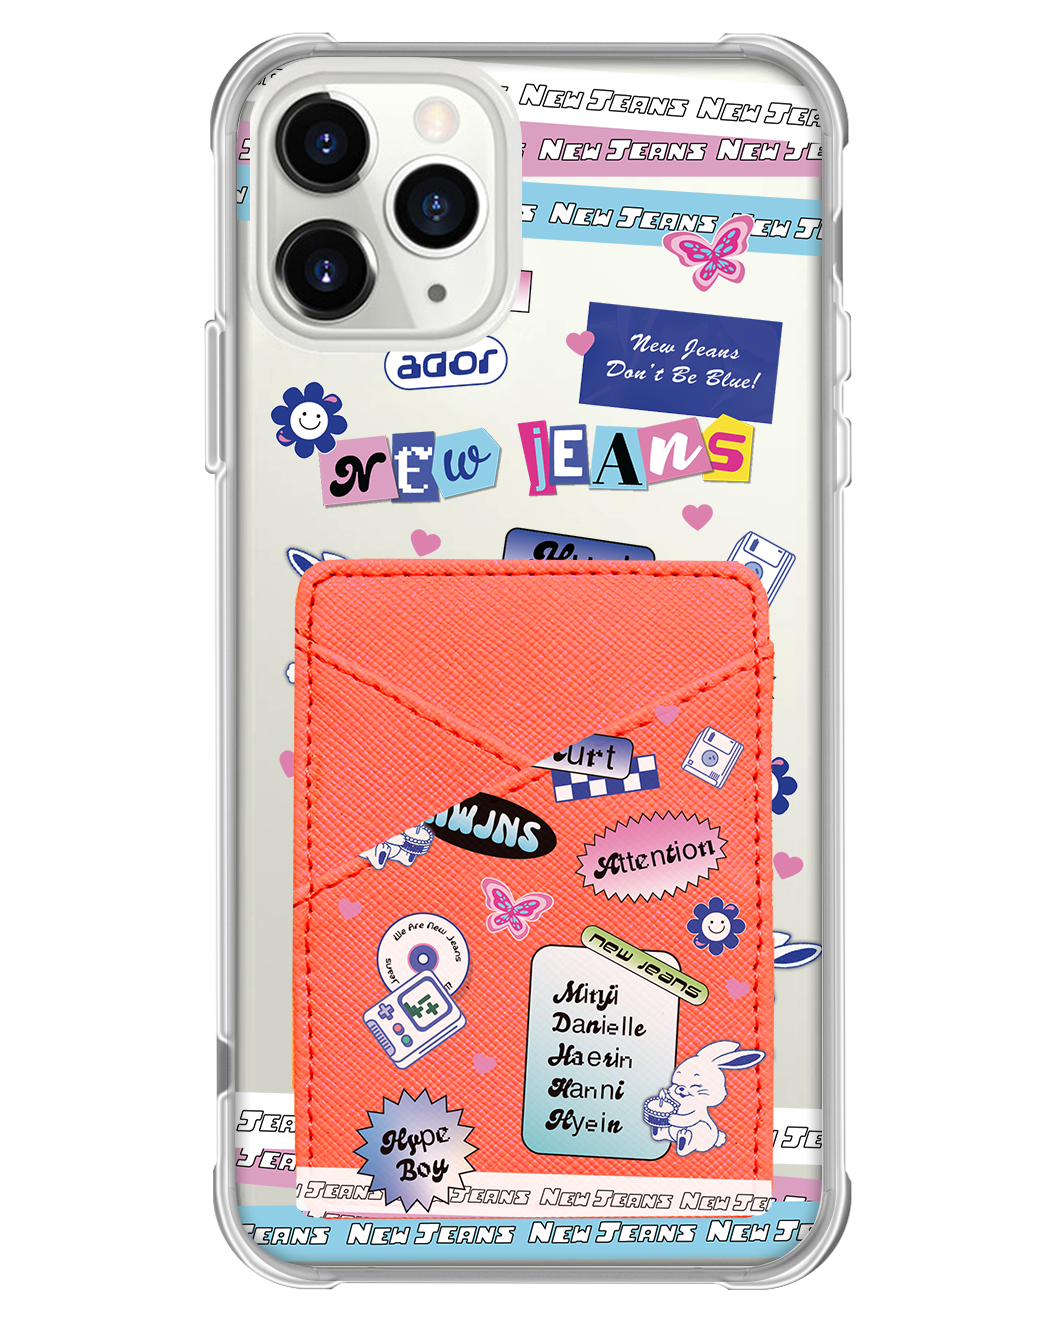 iPhone Phone Wallet Case - New Jeans Sticker Pack